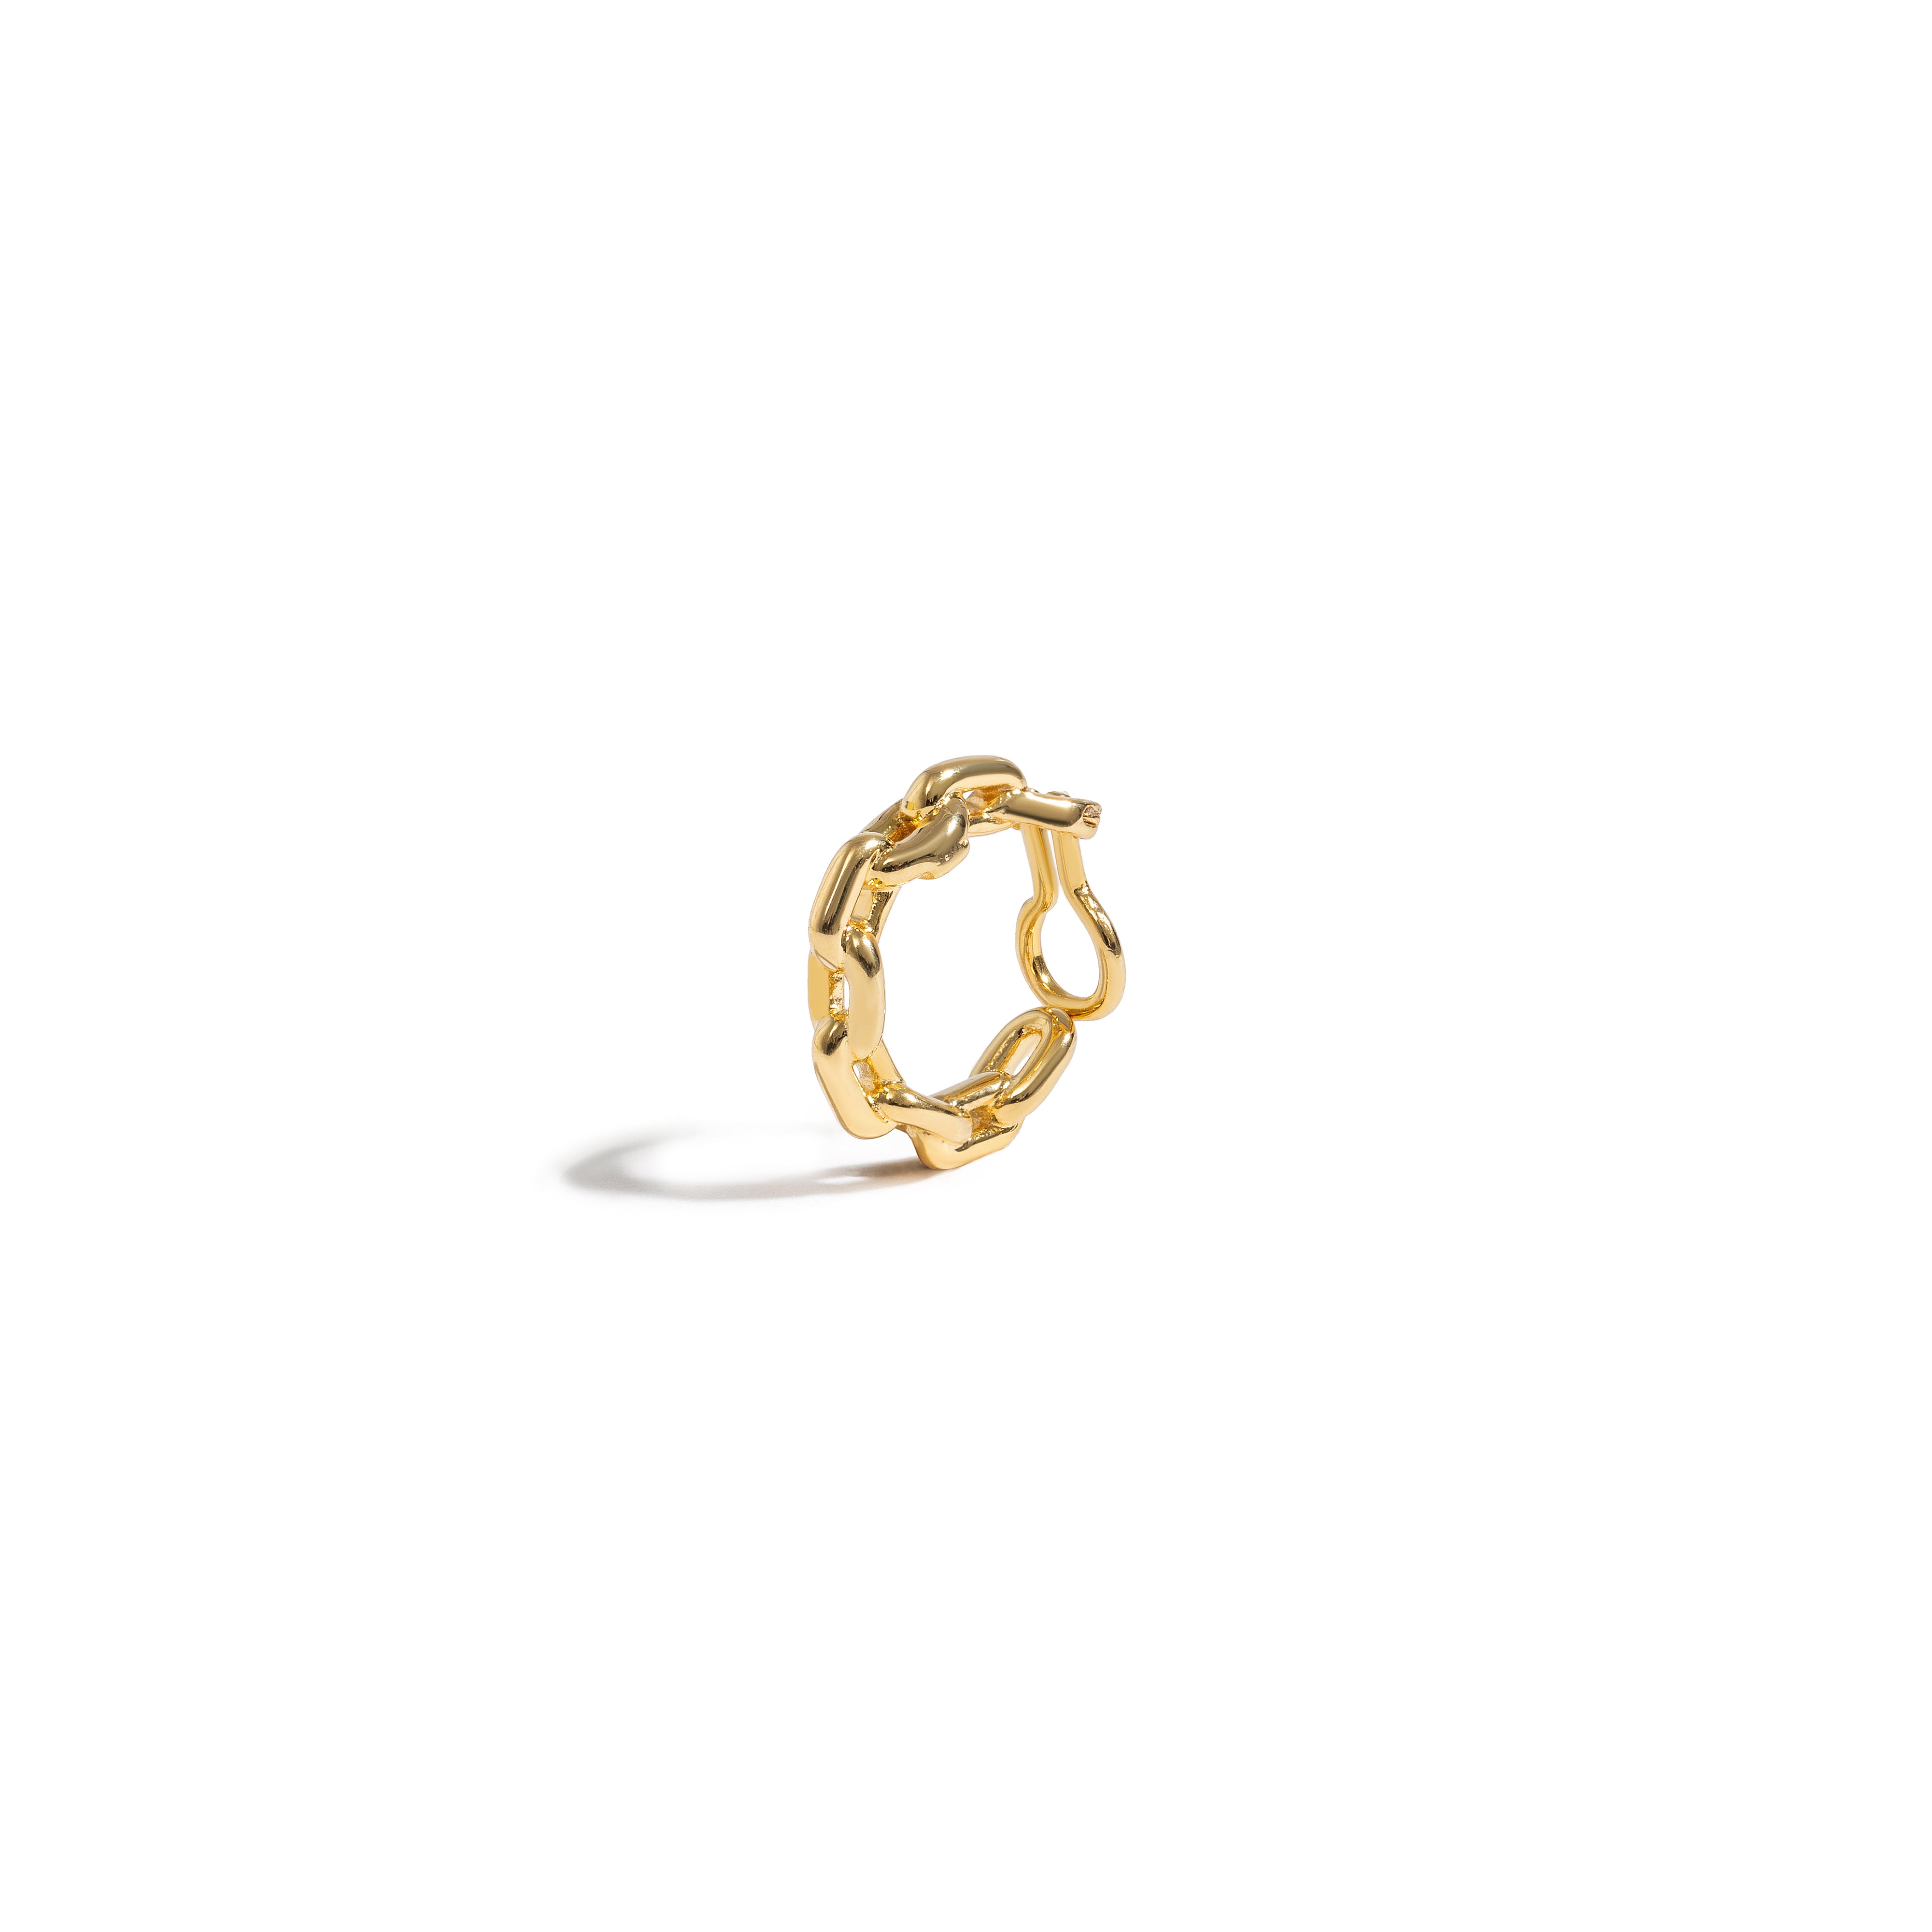 CHAIN EAR CUFF IN 18K YELLOW GOLD PLATED SILVER